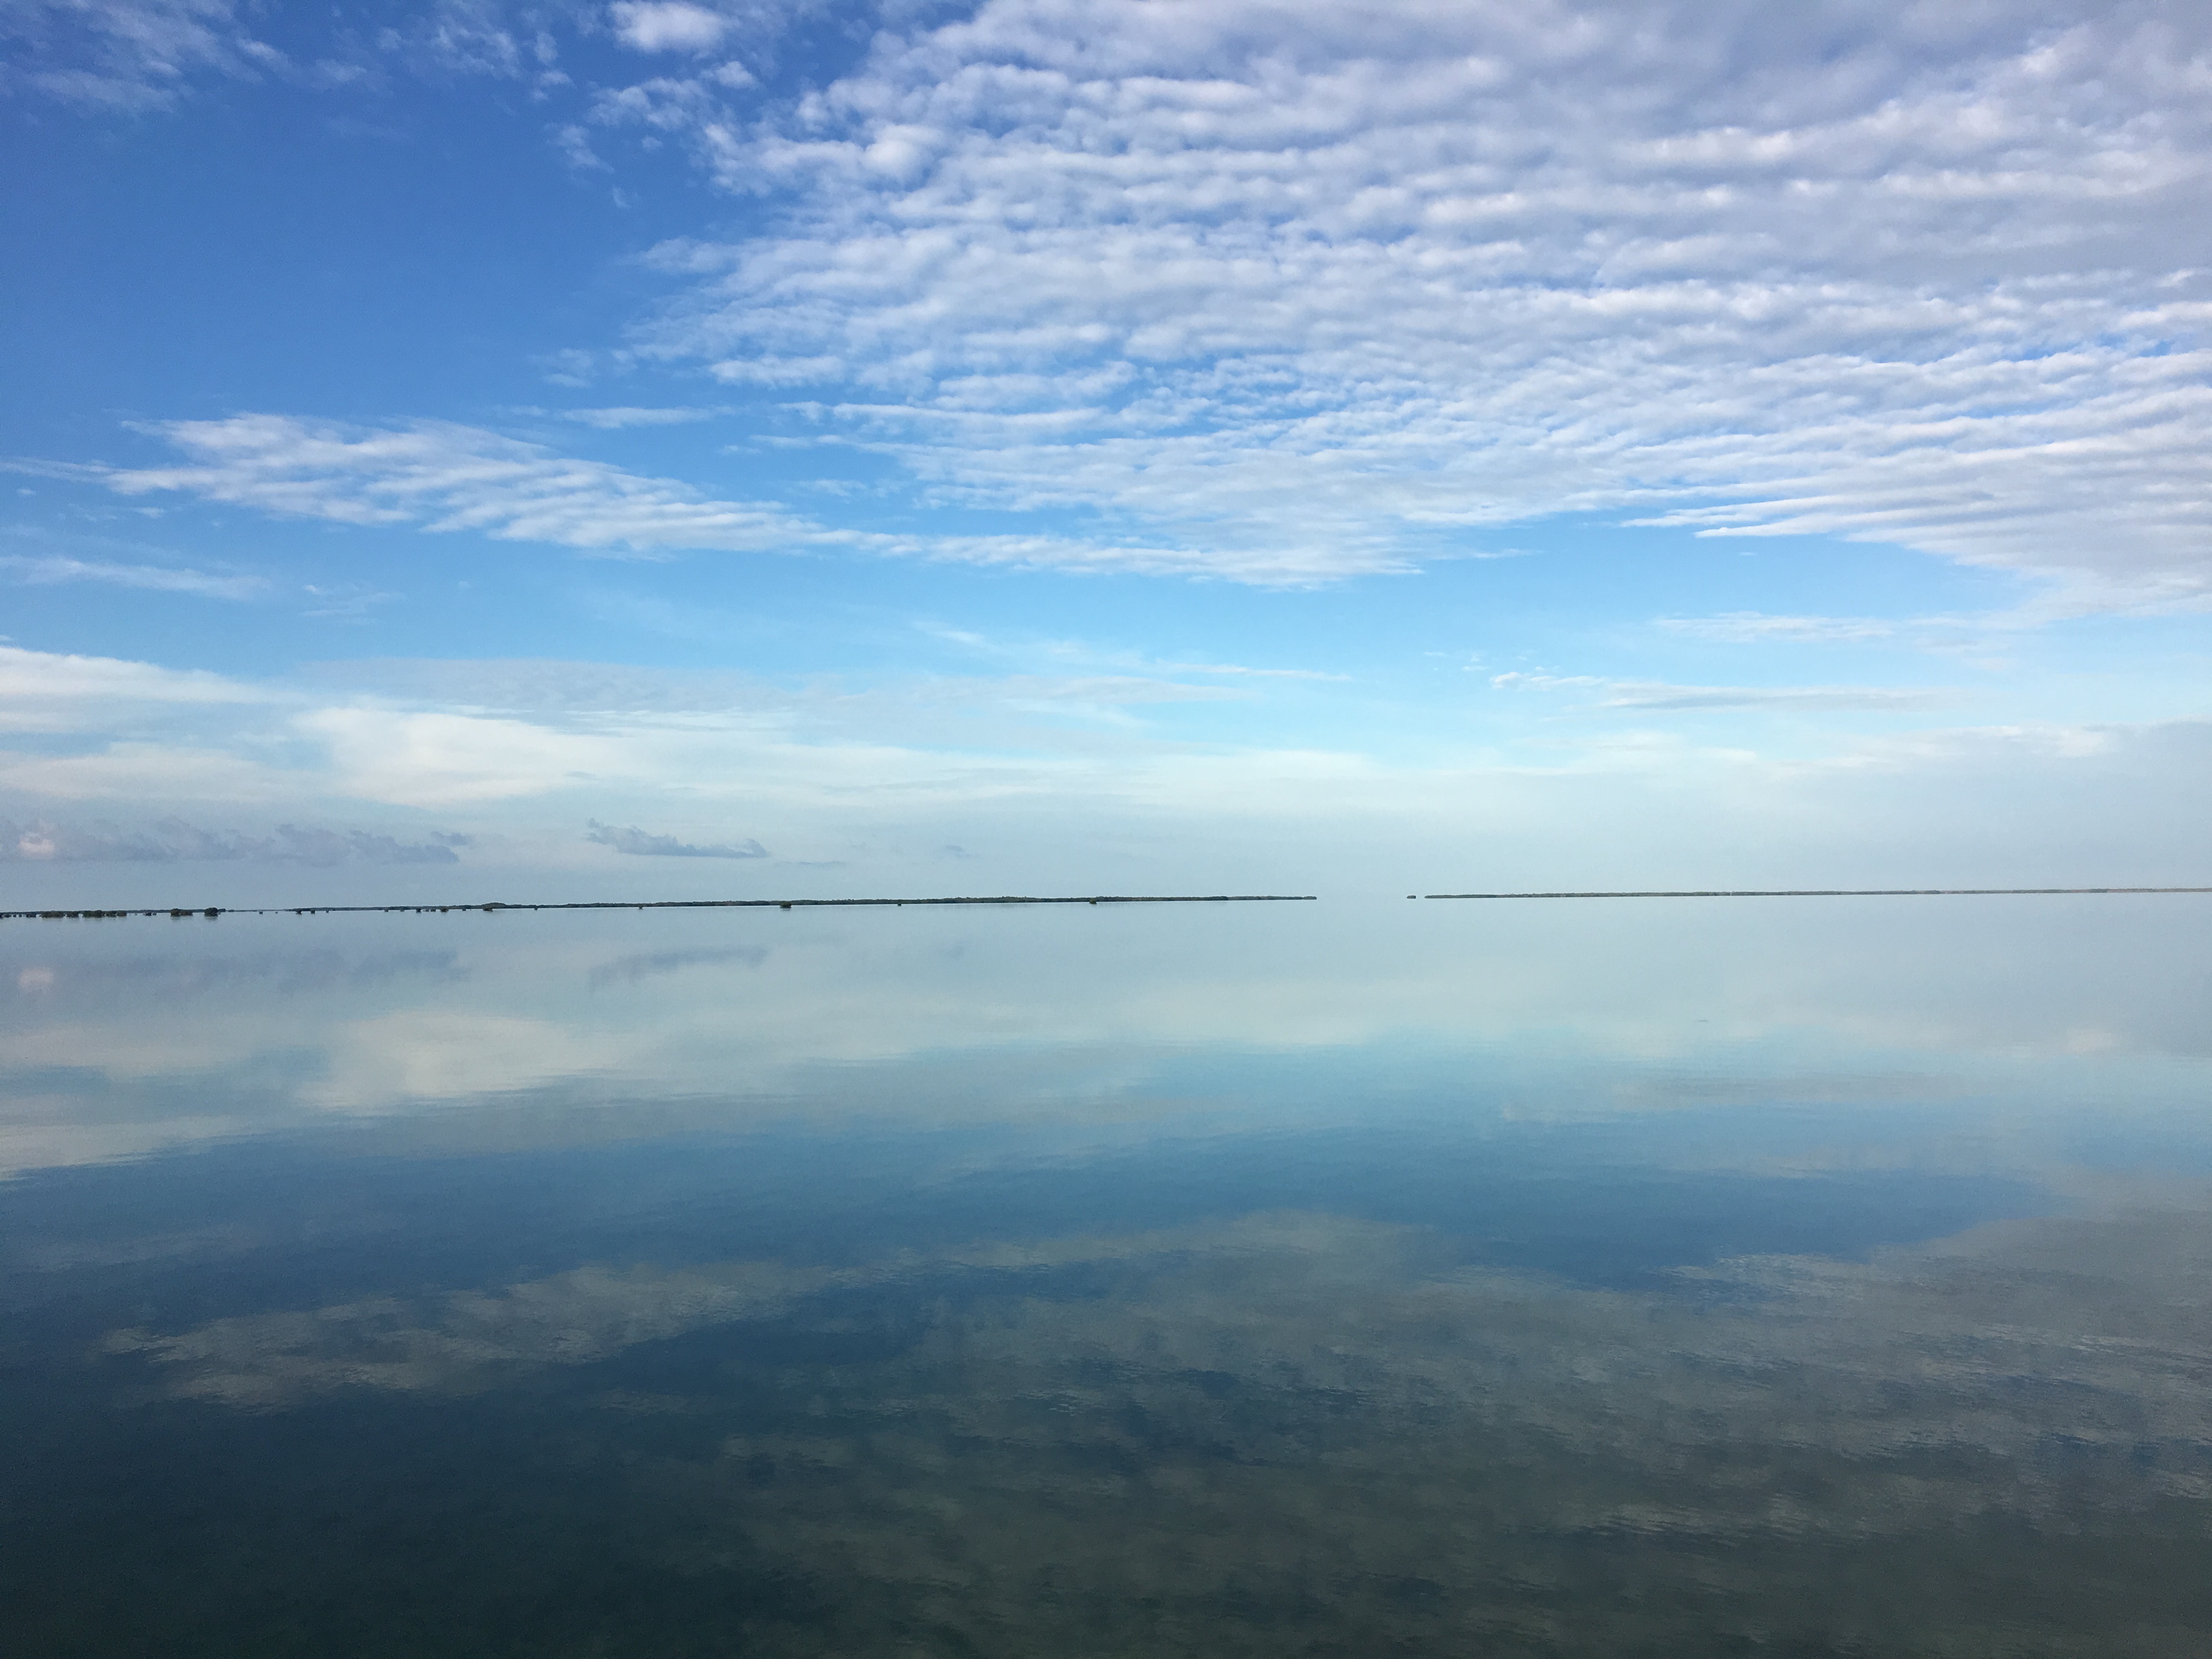 Florida bay, the water reflecting the blue sky and clouds. Photo: Kelly Cox/Audubon Florida.